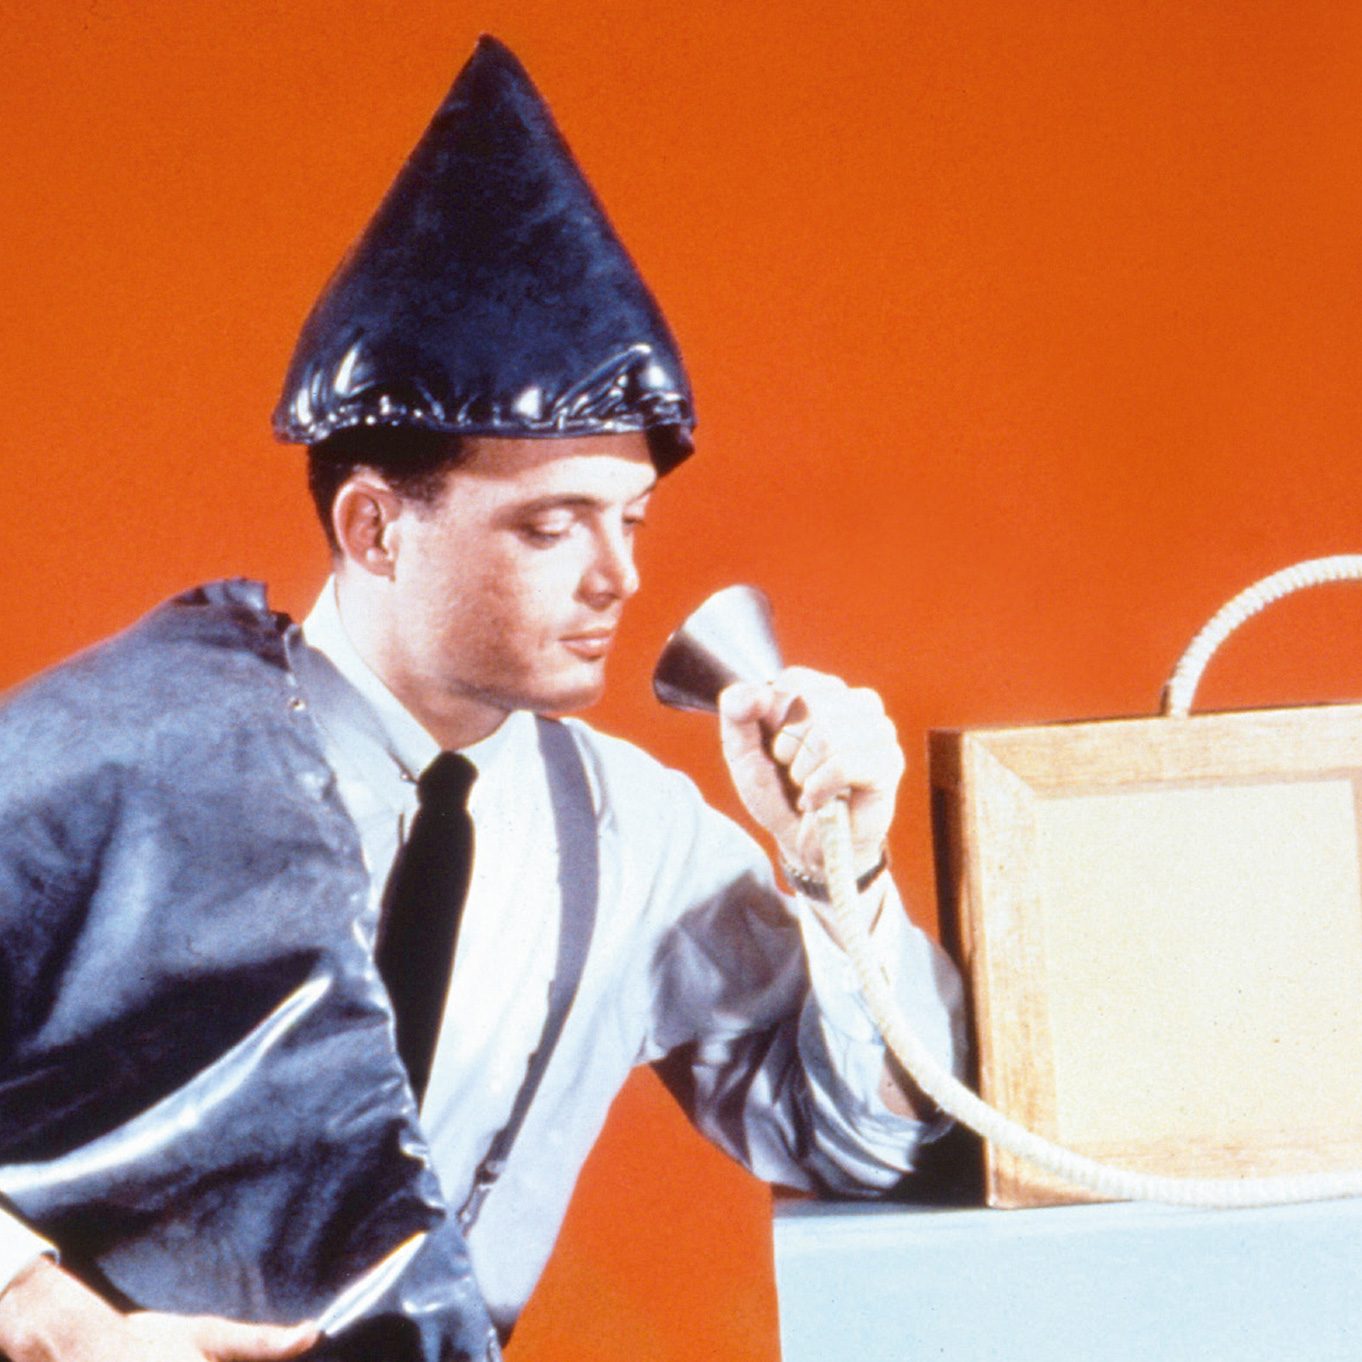 Orgone accumulator cabinet being used by a man in a pointed hat